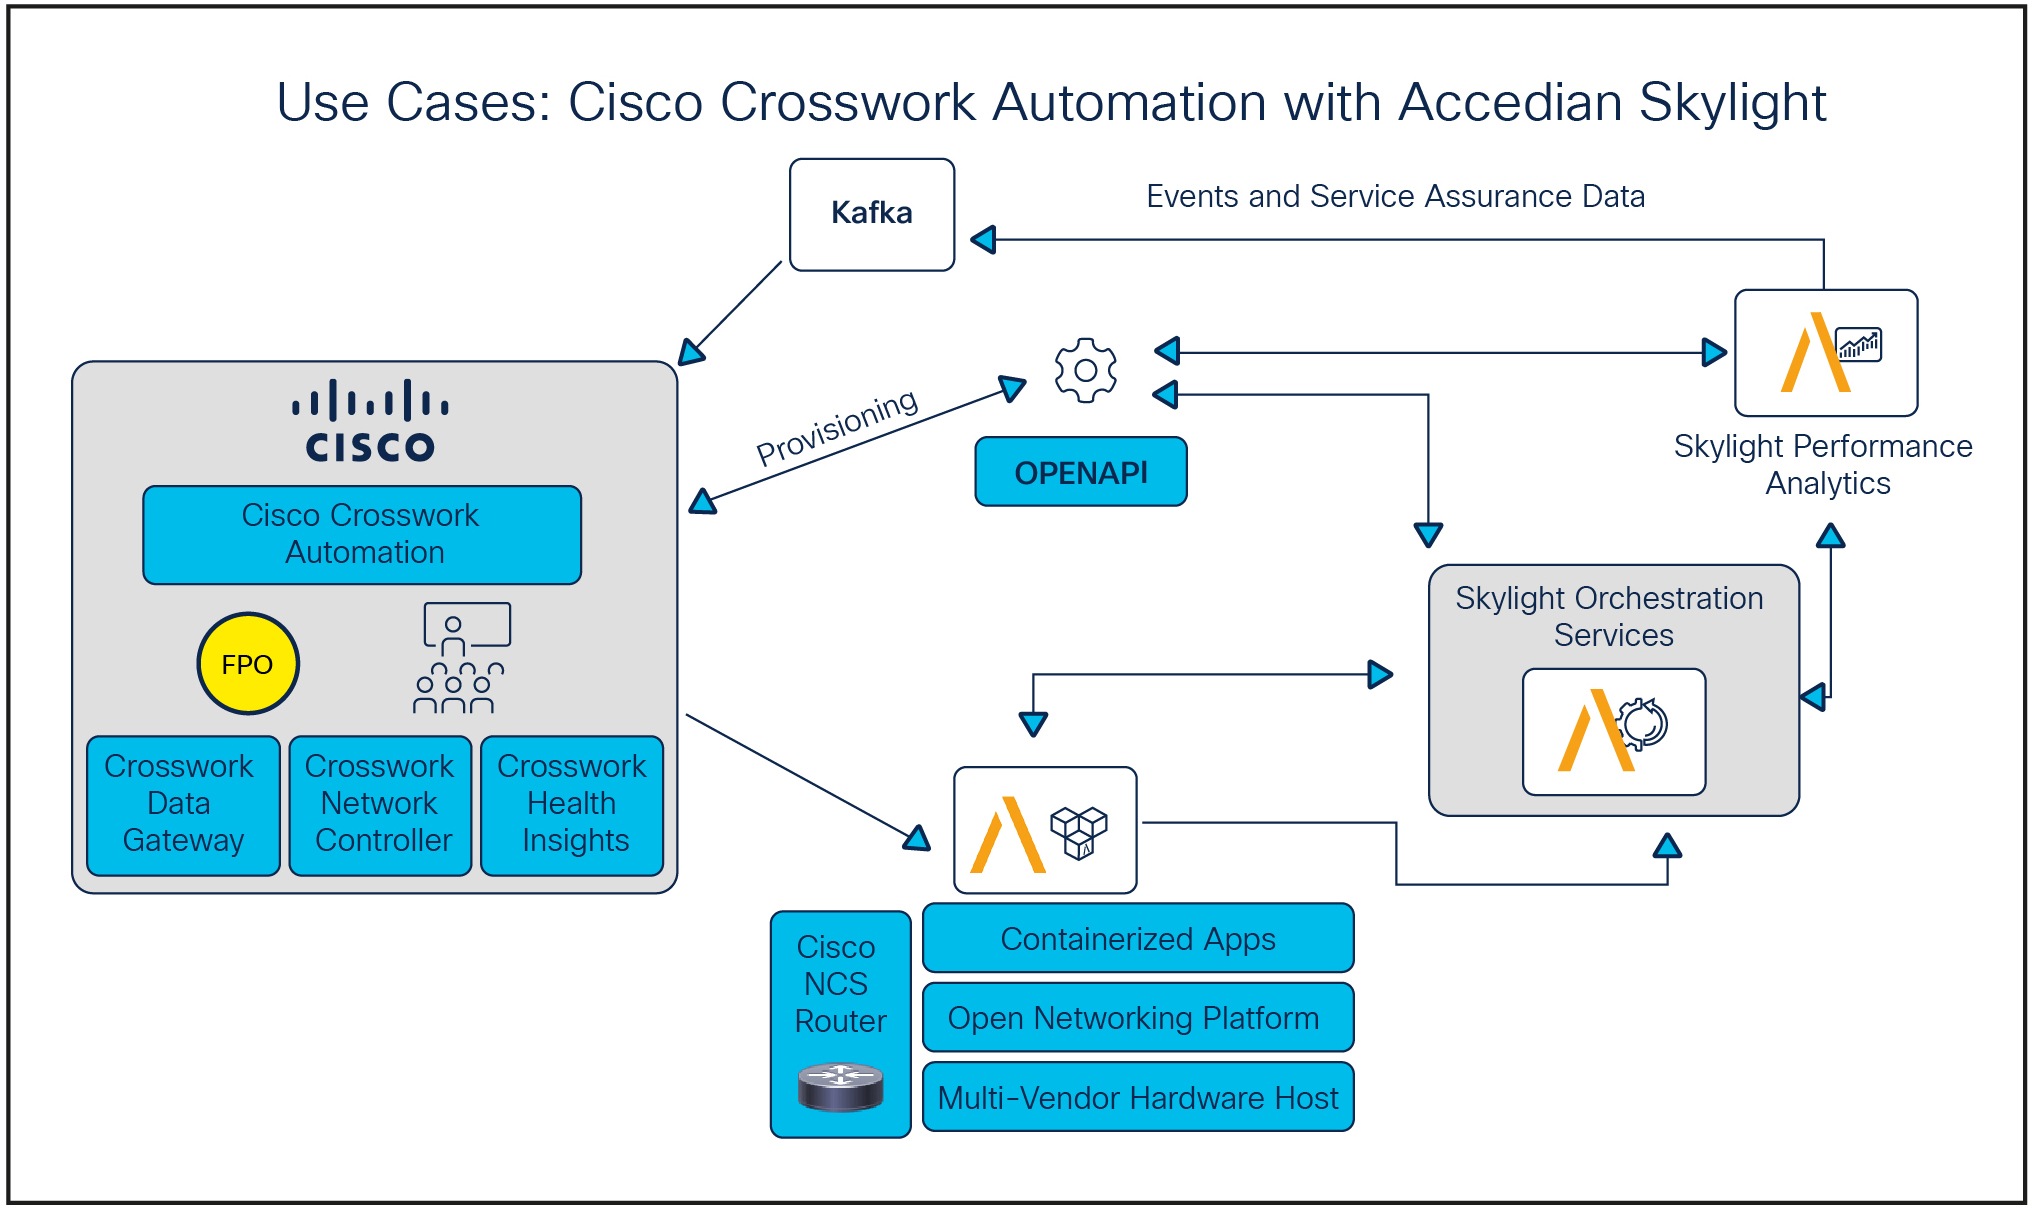 Use cases: Cisco Crosswork Automation with Accedian Skylight